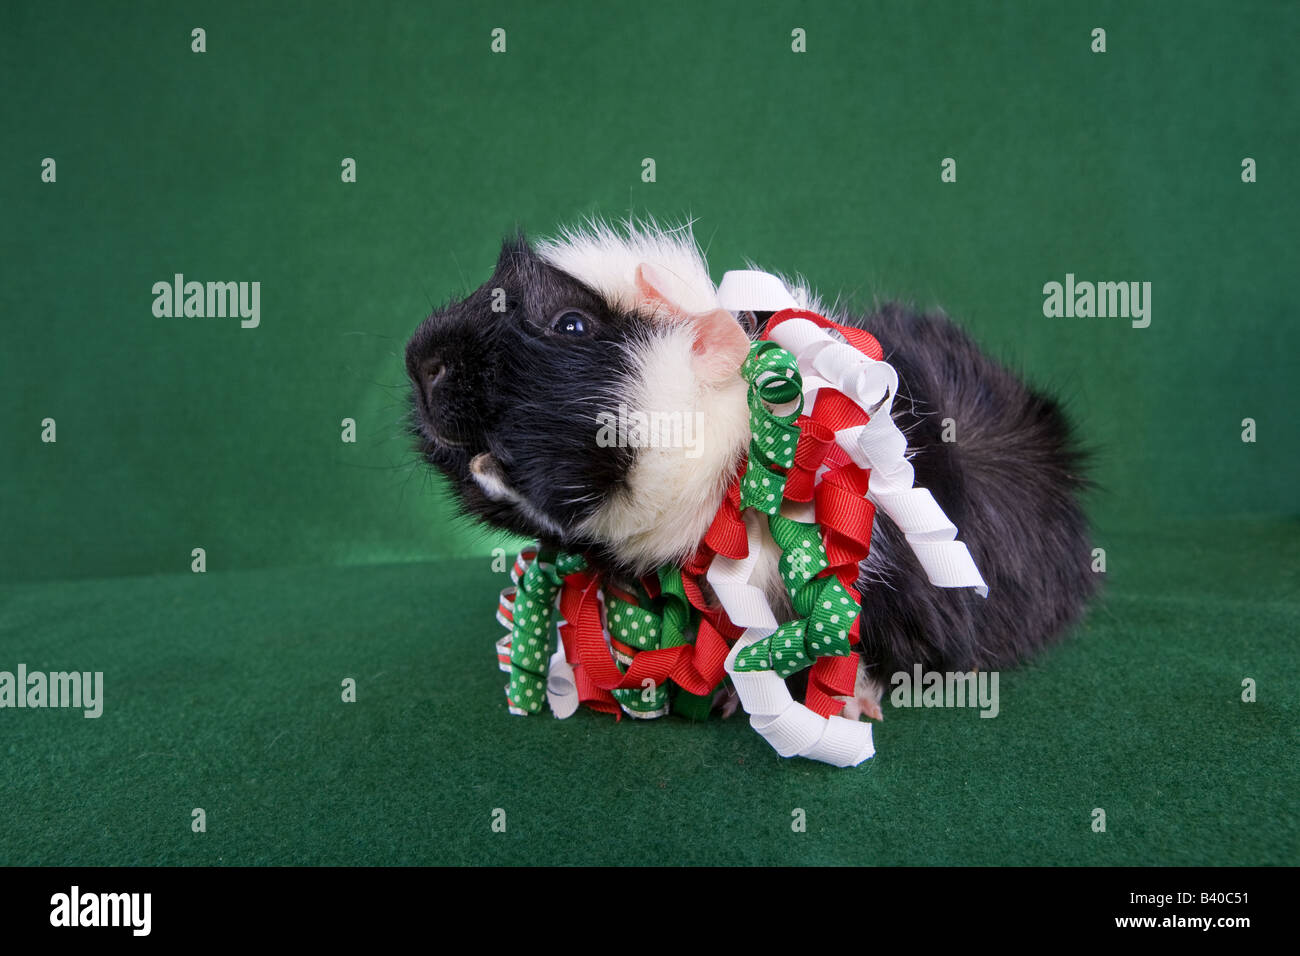 Christmas Guinea pig on green background Stock Photo